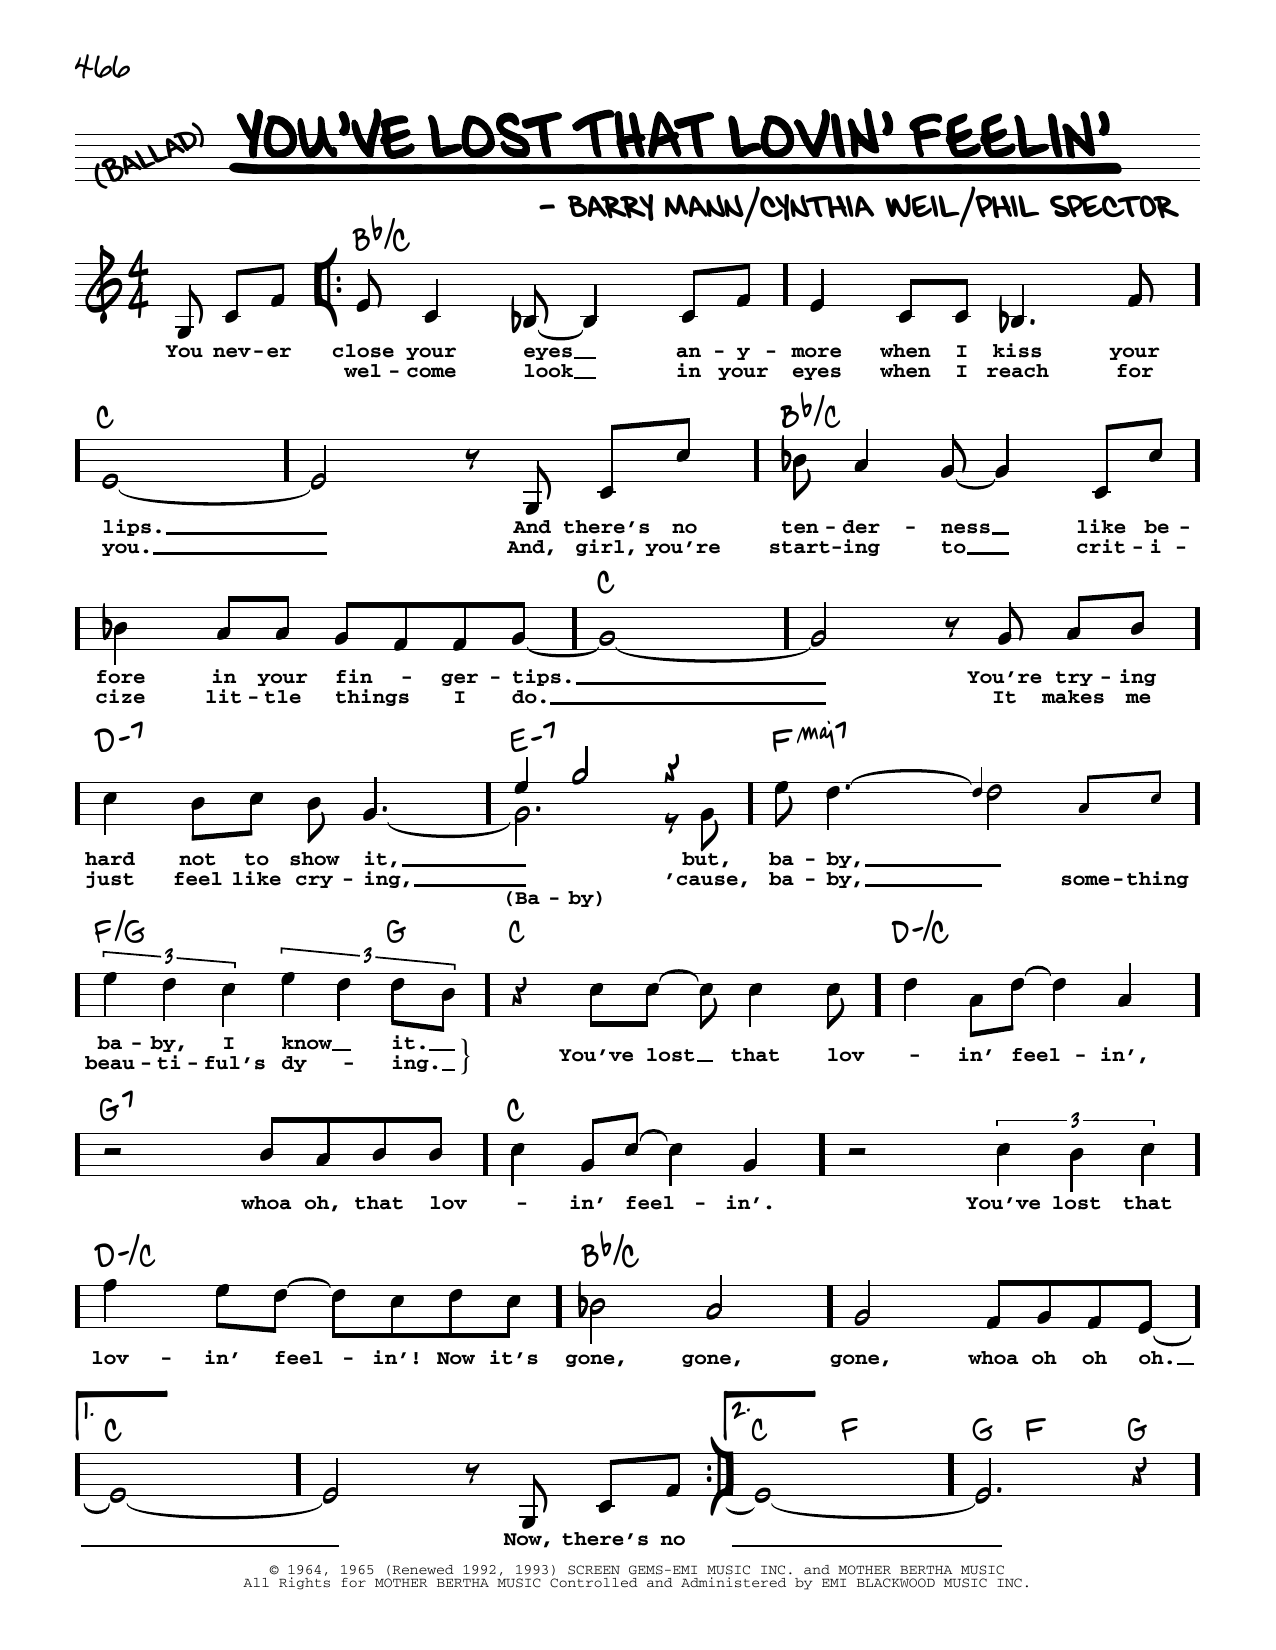 Download The Righteous Brothers You've Lost That Lovin' Feelin' (Low Vo Sheet Music